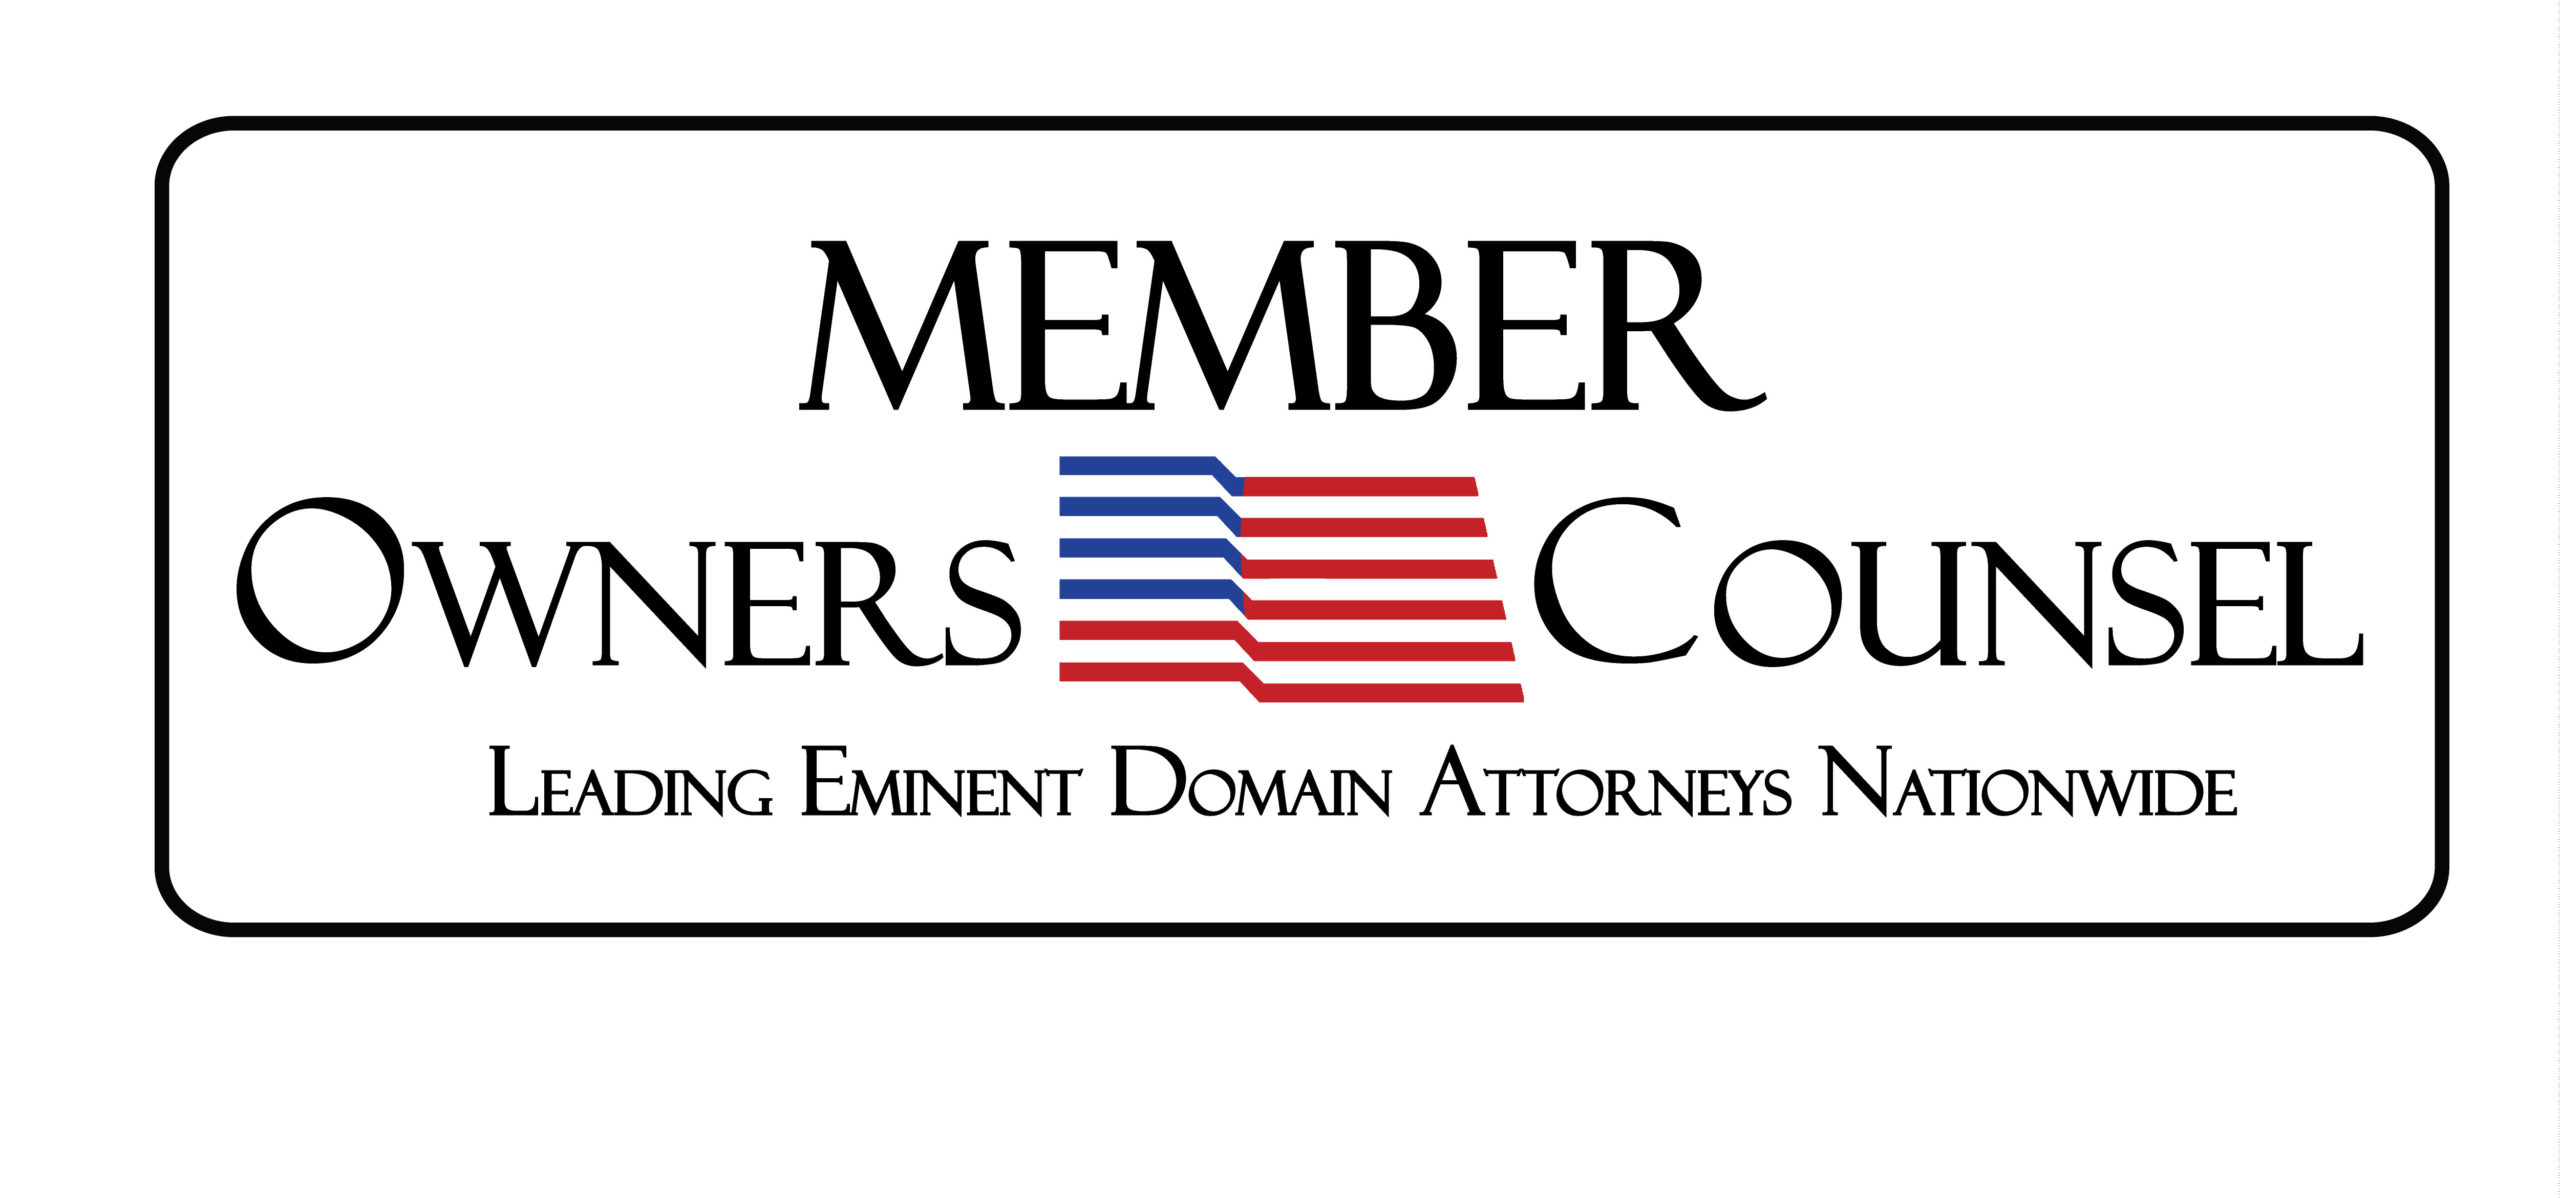 Member Owners' Counsel